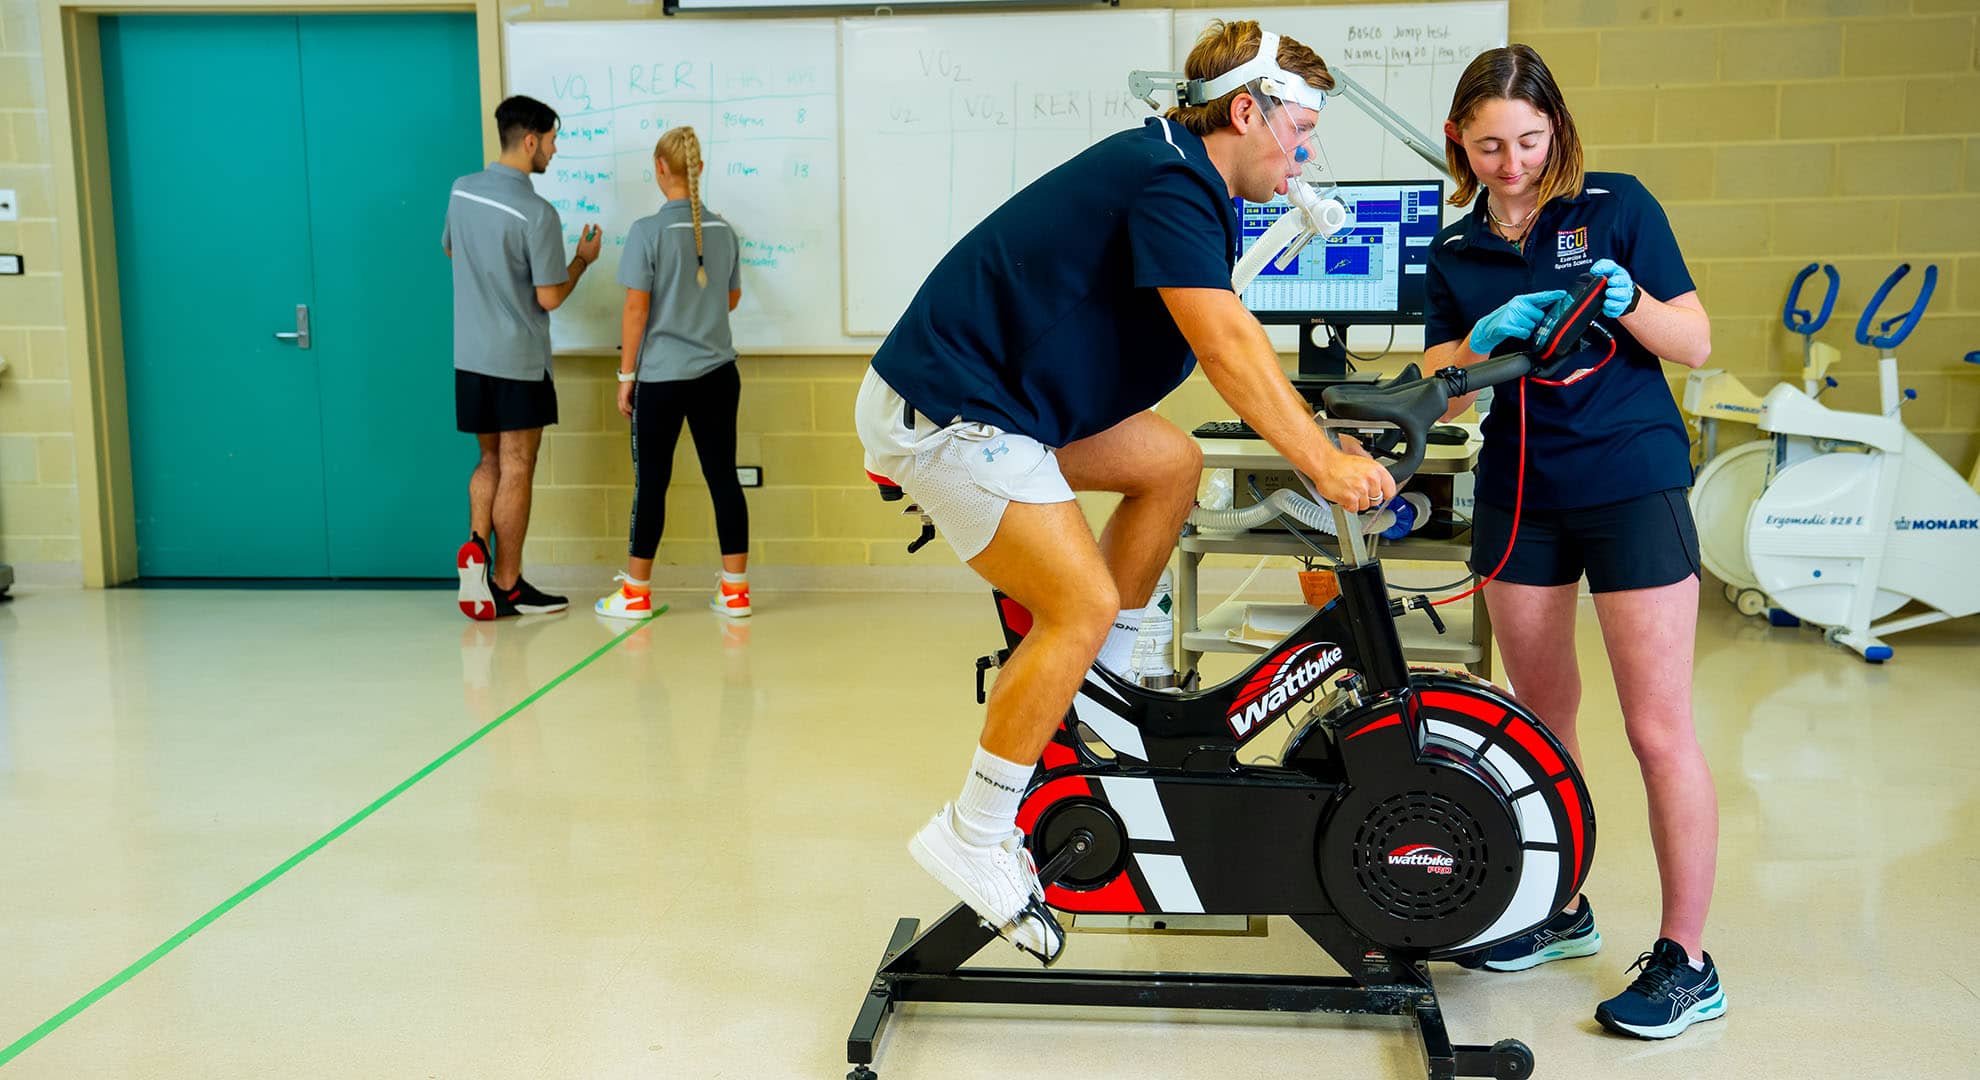 Female student in laboratory with man on exercise bike